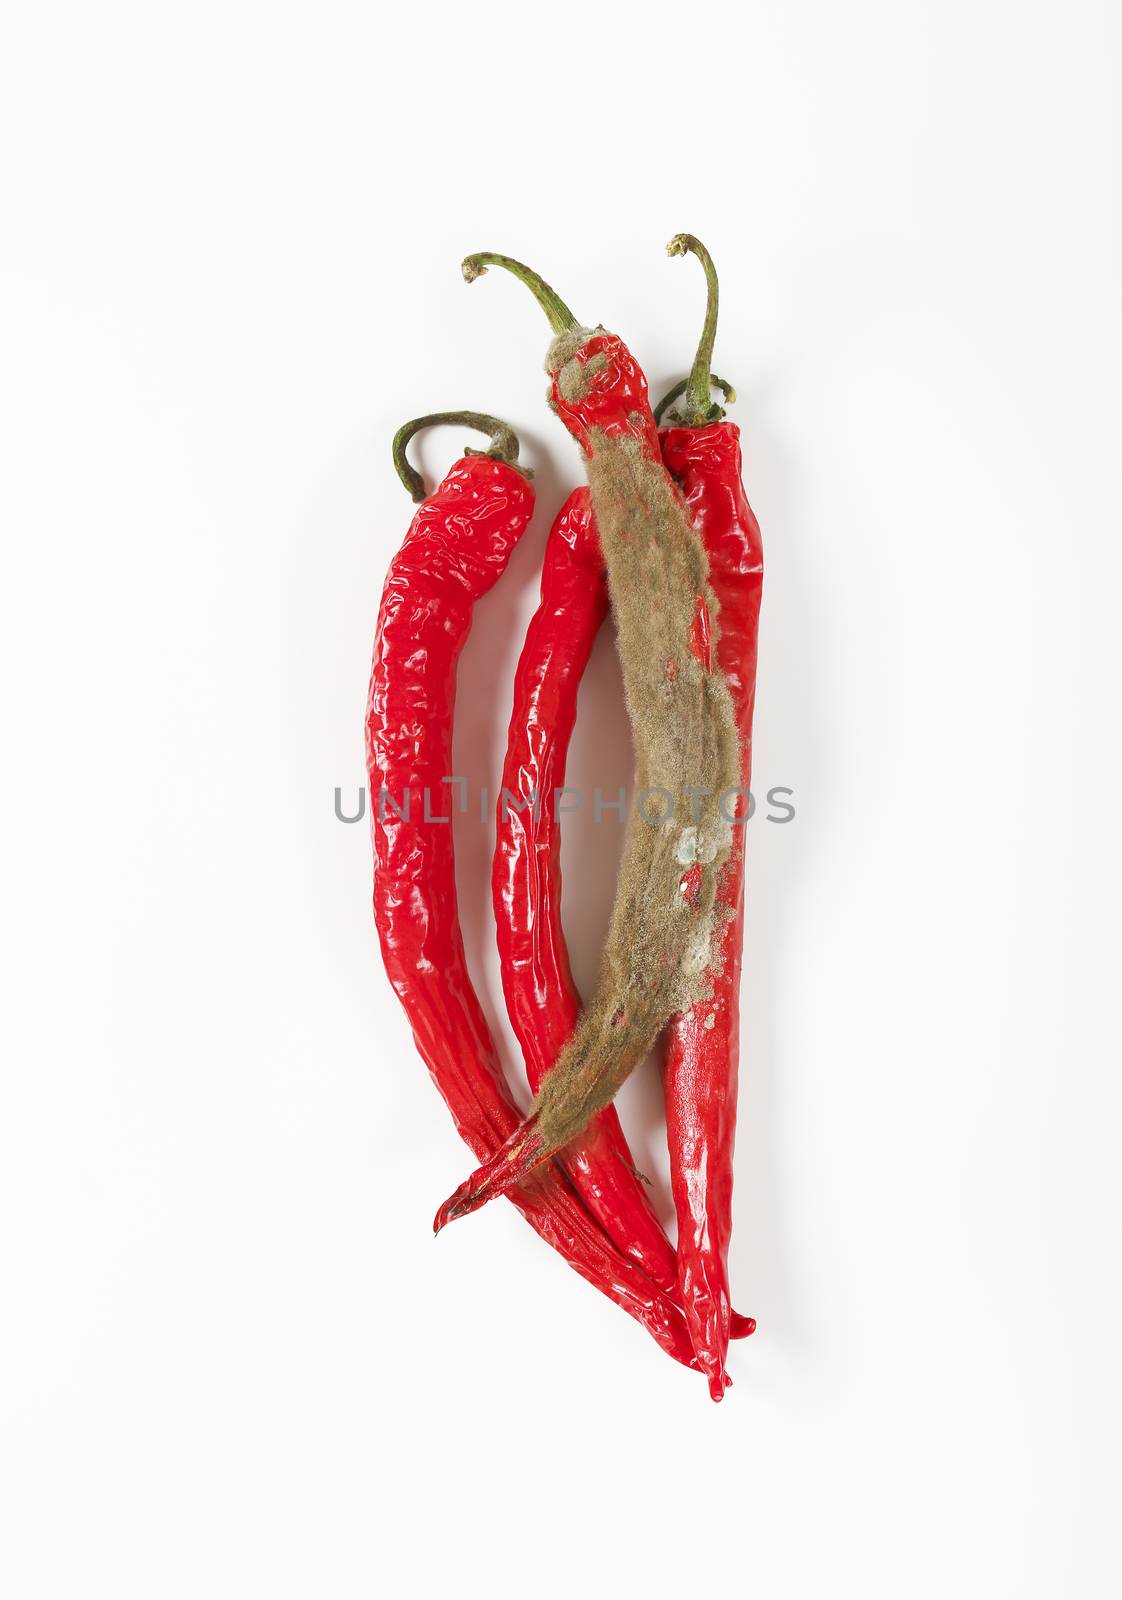 shrinking and mouldy chili peppers on white background